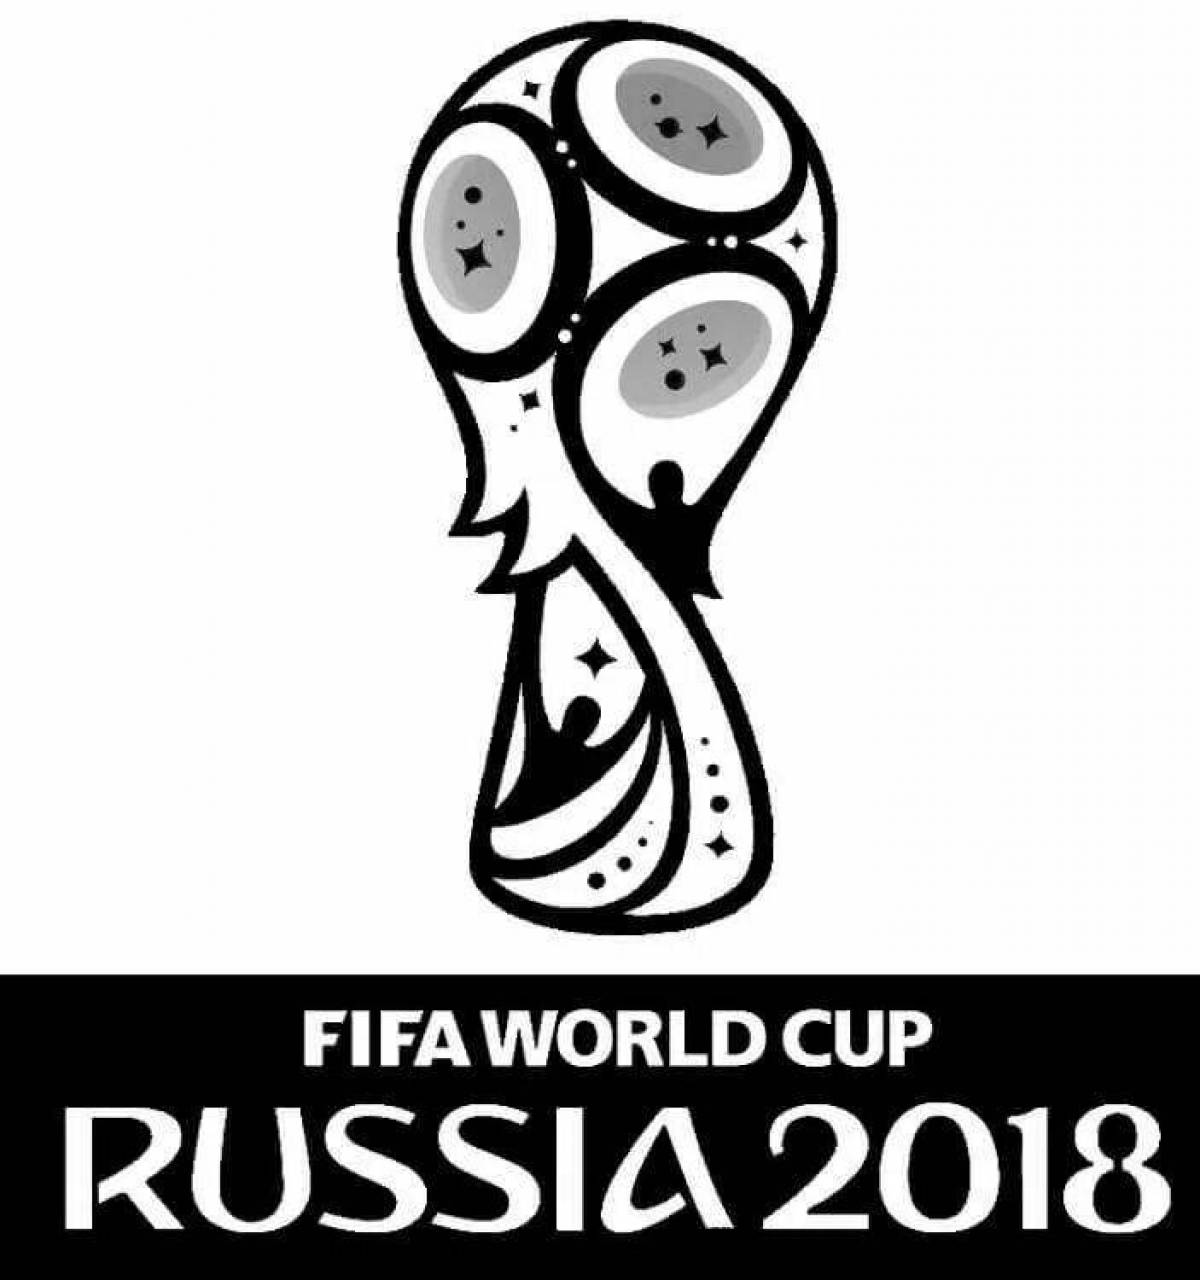 Gorgeous World Cup coloring book